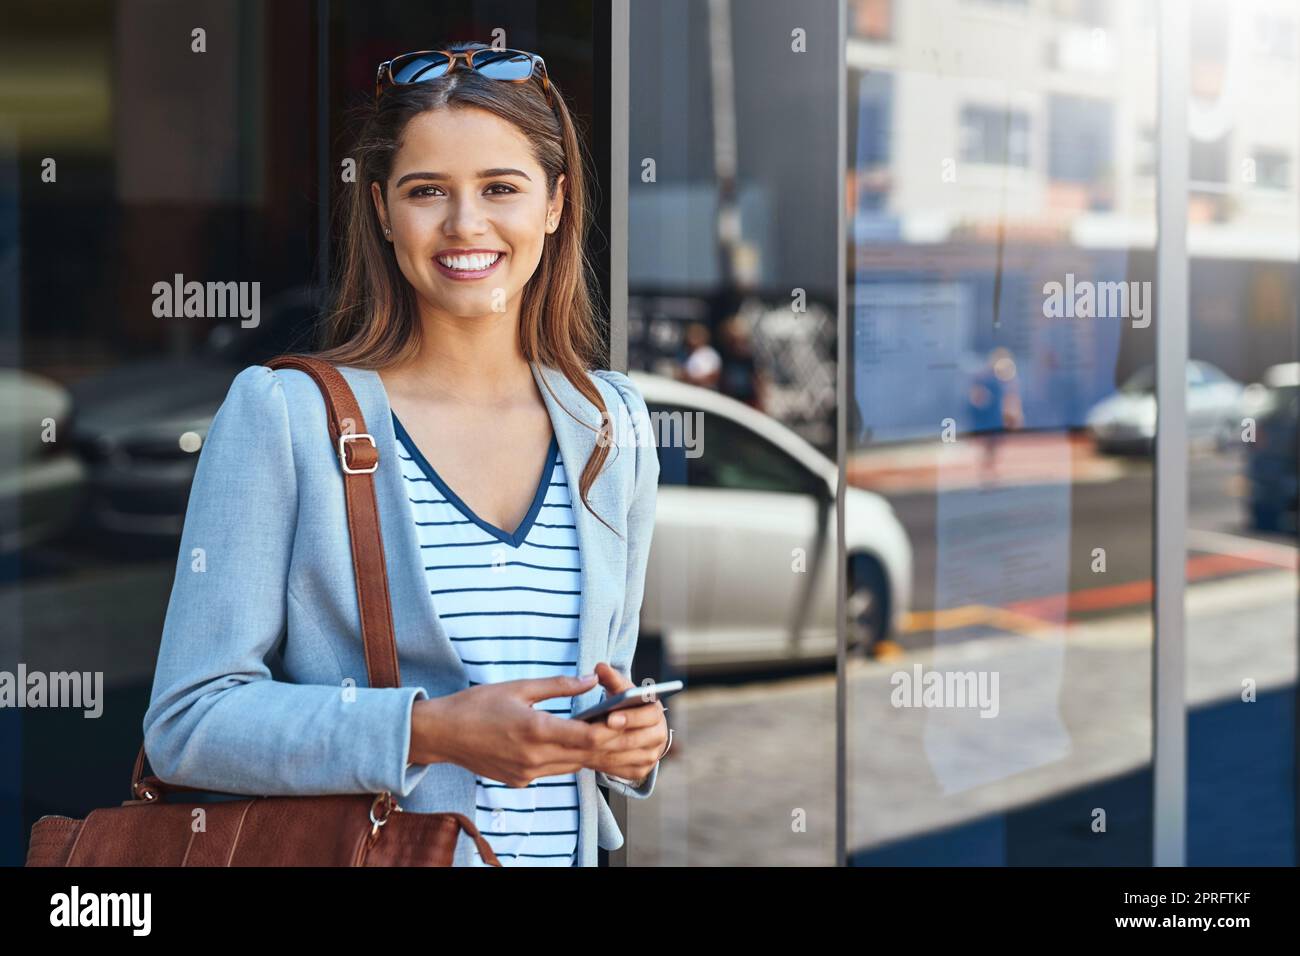 Thats work done for the day. Cropped portrait of an attractive young woman using her cellphone while leaving the office. Stock Photo